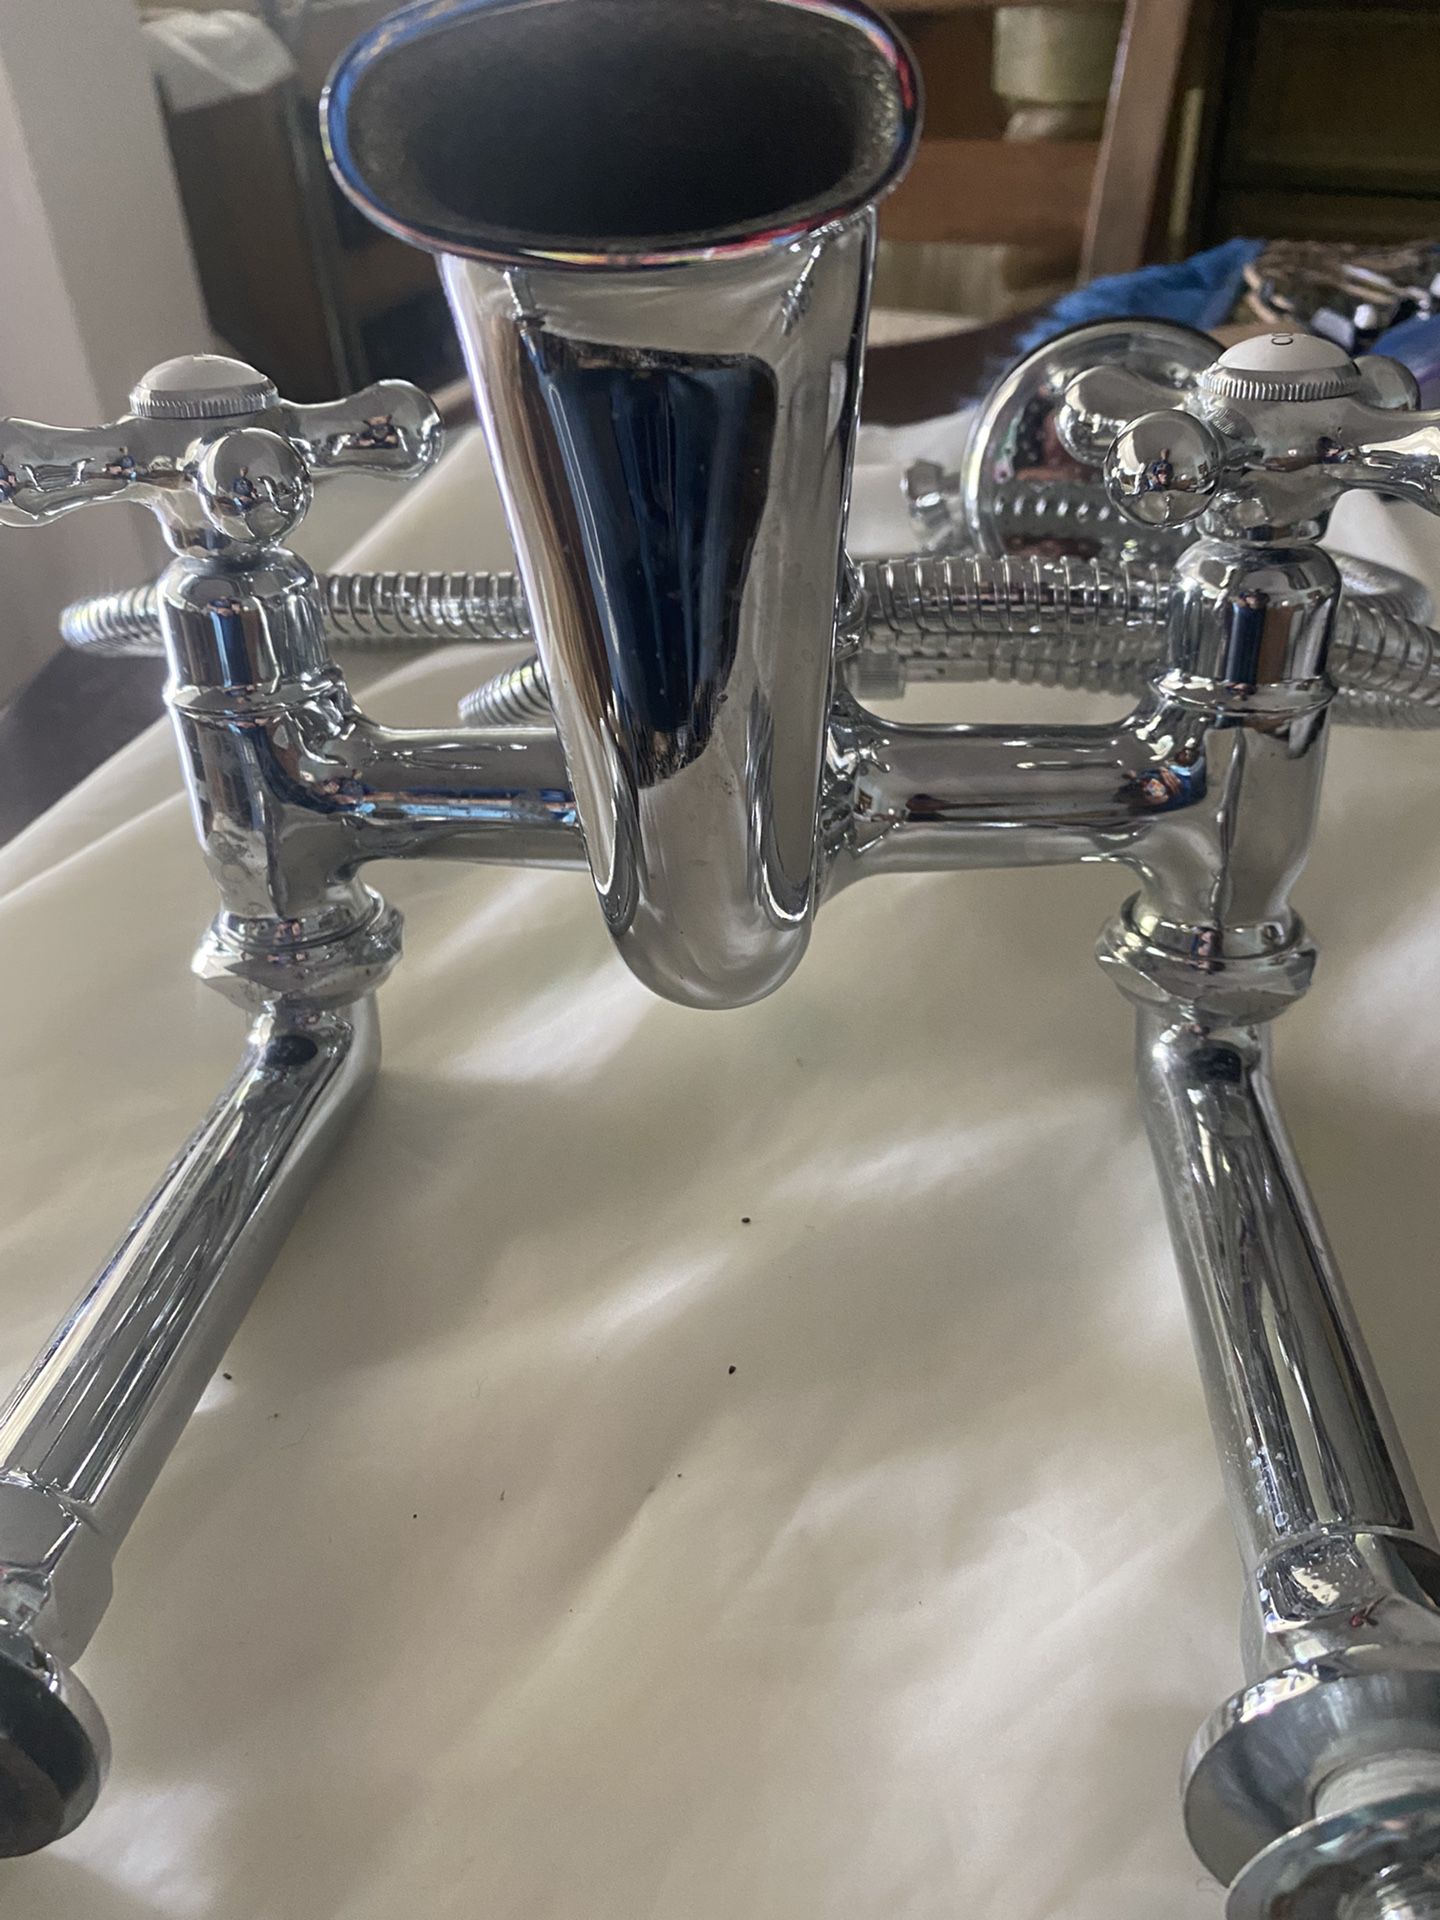 “M” Designer Chrome MOUNT FAUCET SET as new it is over $600. New… asking $350. Obo today 